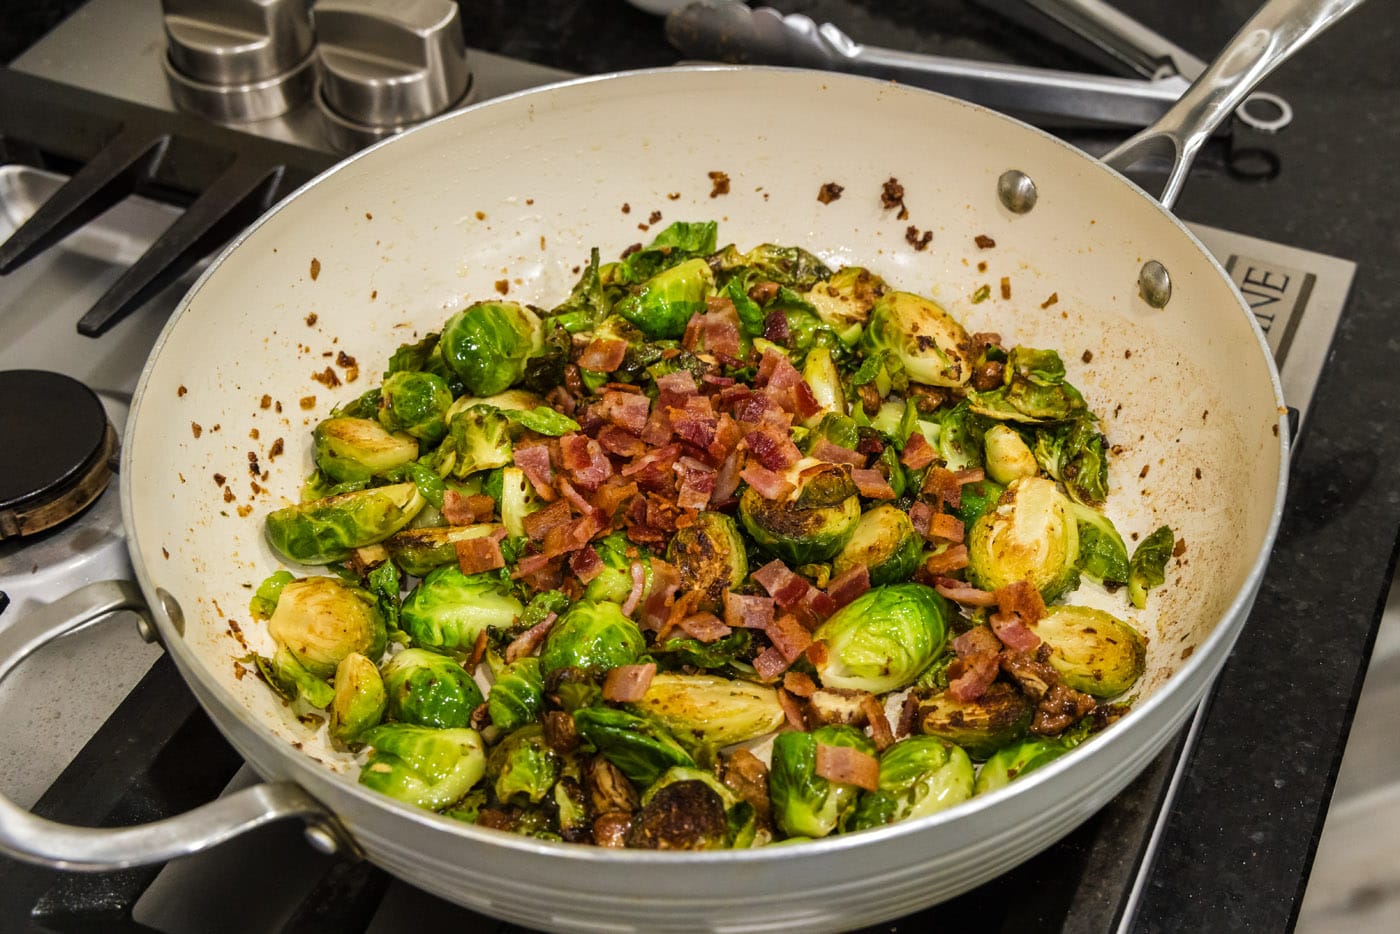 chopped bacon added to brussels sprouts with candied pecans